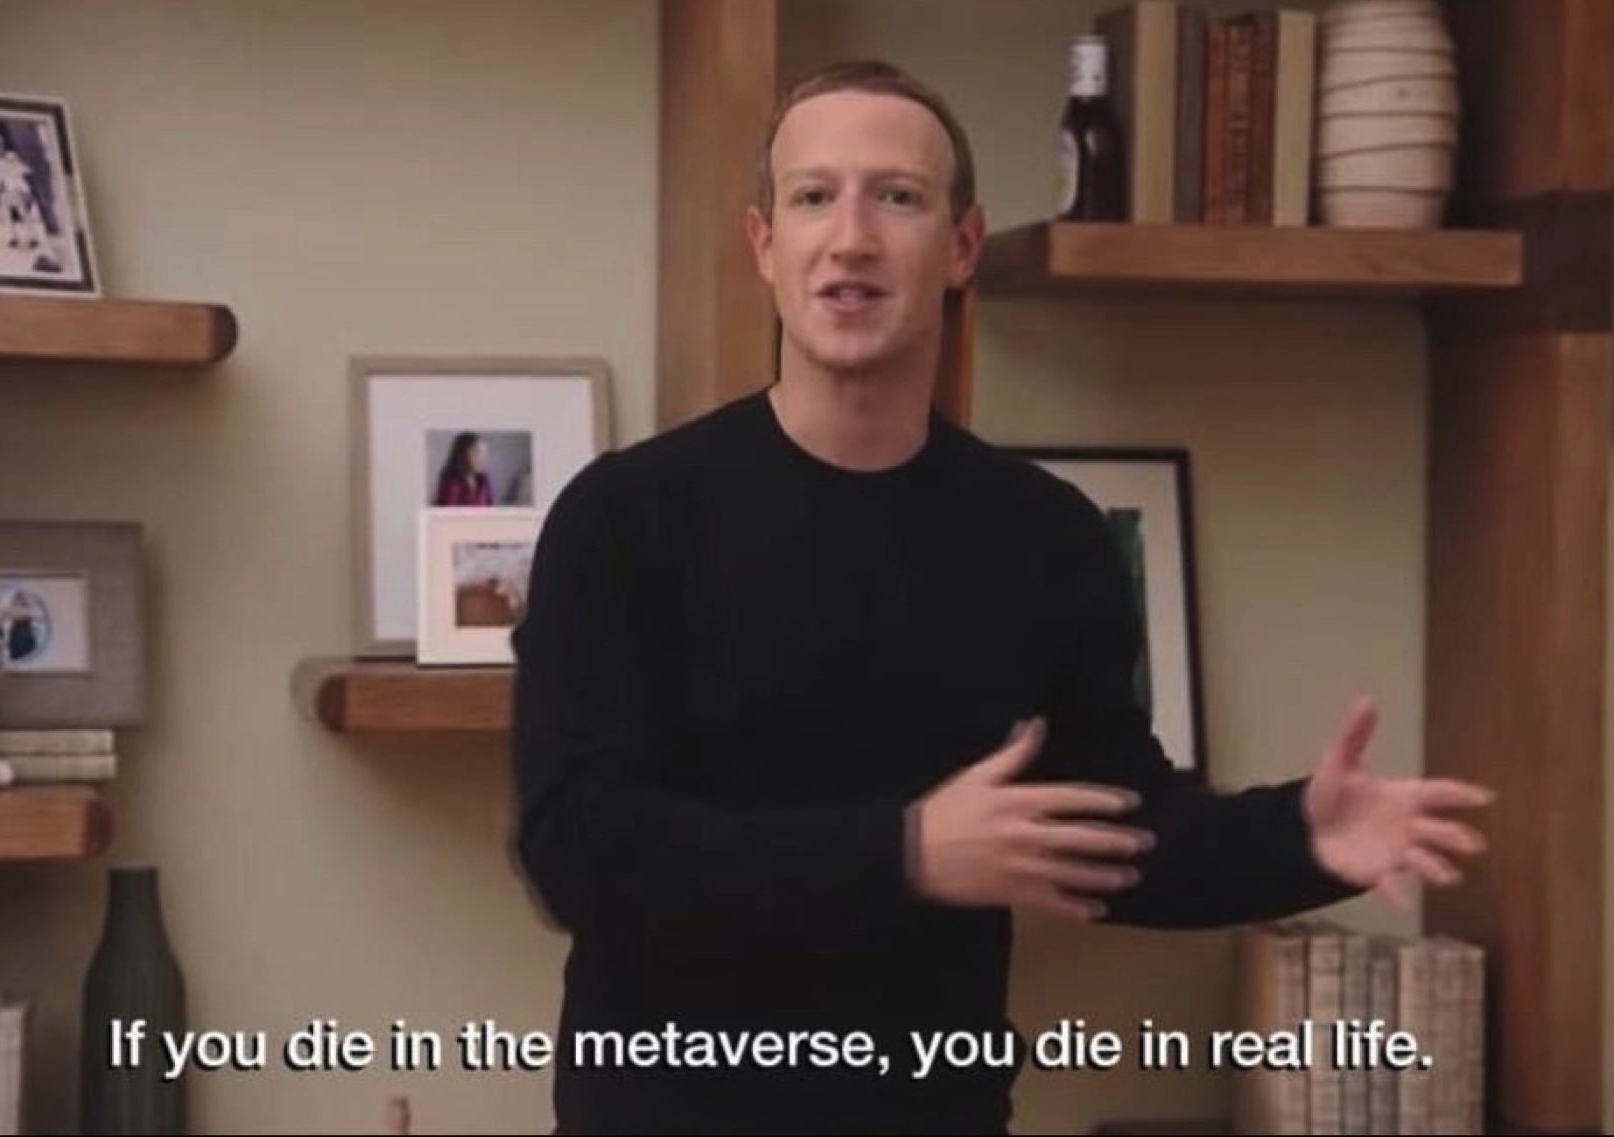 Meme image showing Mark Zuckerberg with the words "If you die in the metaverse, you die in real life" superimposed